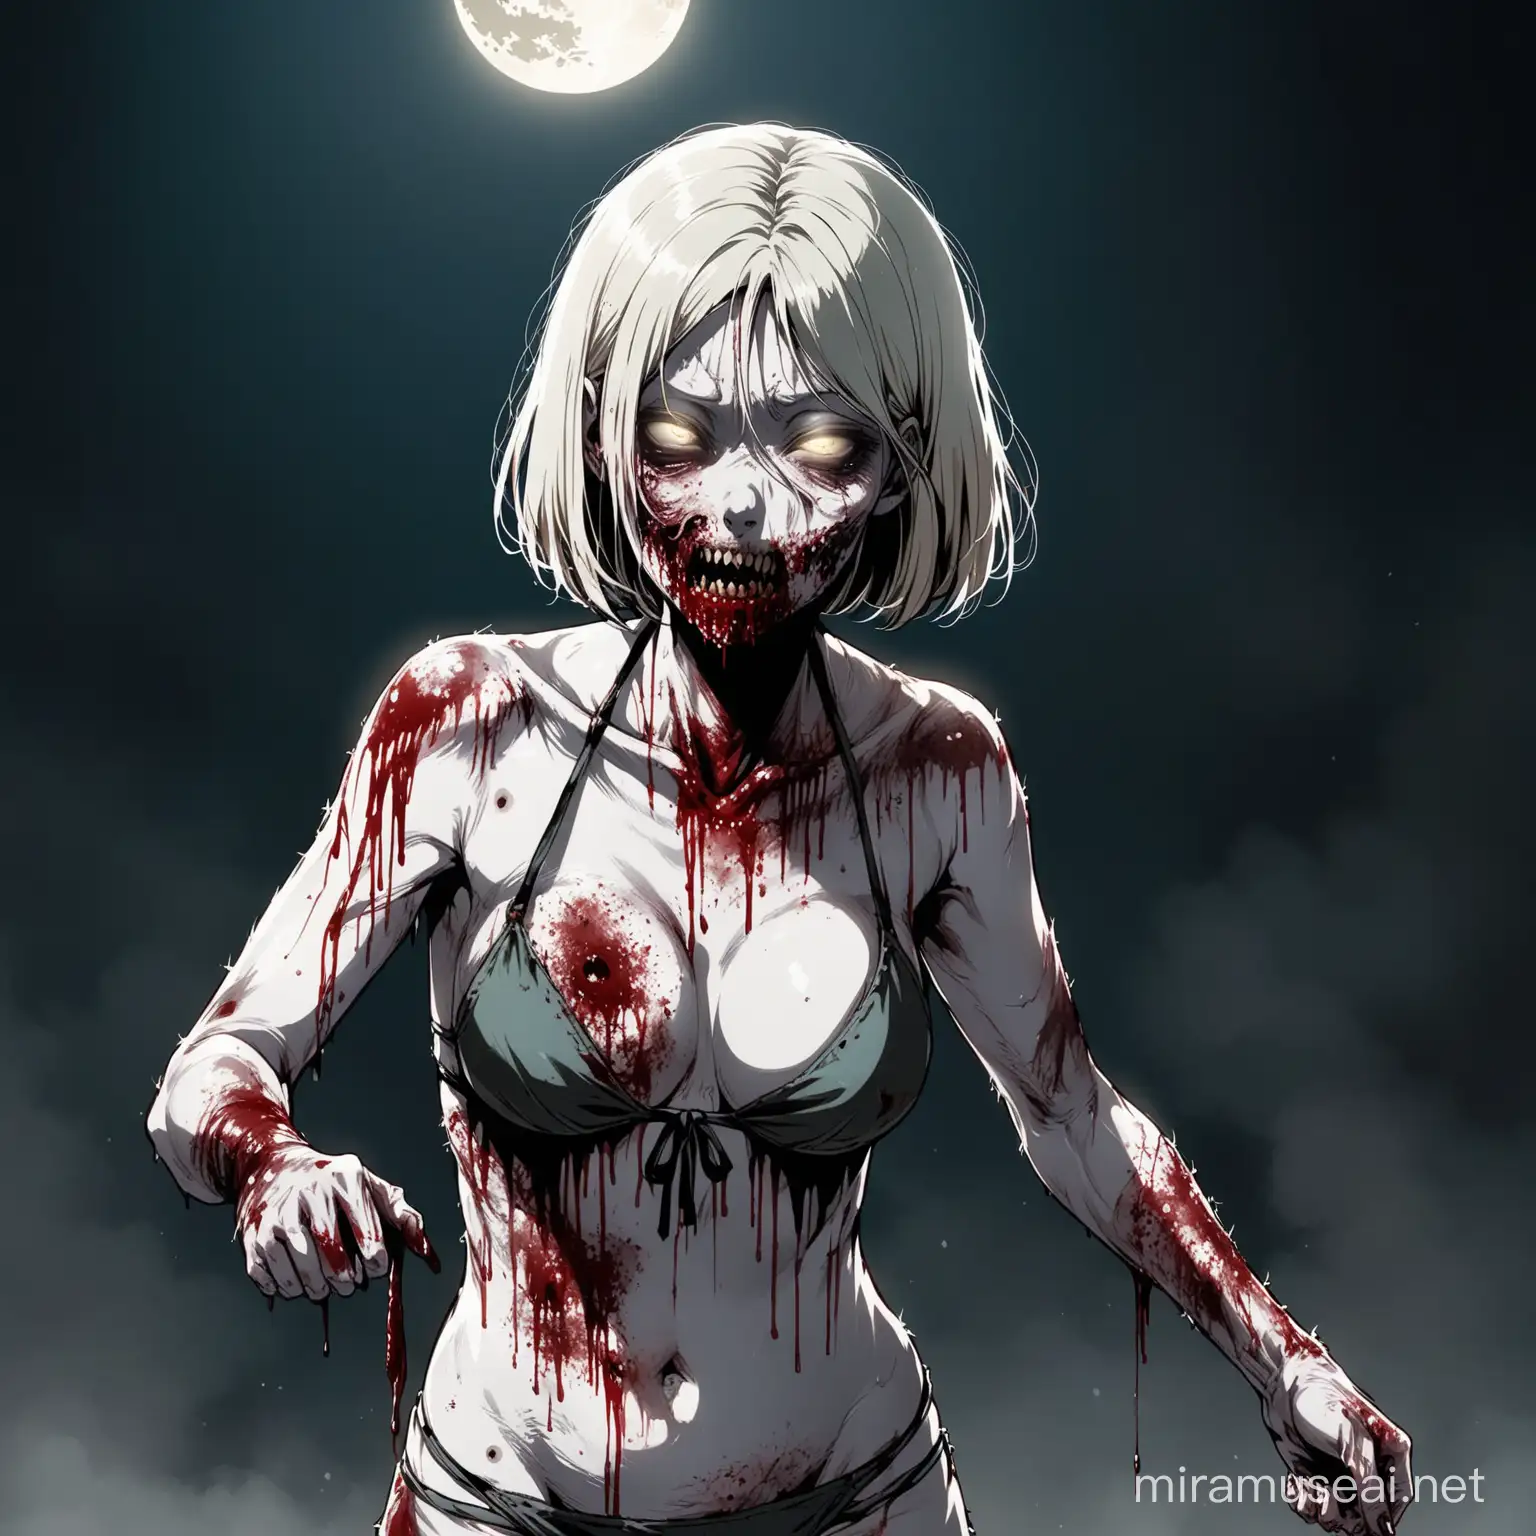 a south korean girl zombie walking dead style with bob haircut middle age pale white zombie eyes as pale as the moon really rotten decaying zombie skin bite marks everywere and she wearing a ripped mouldy bikini covered in blood